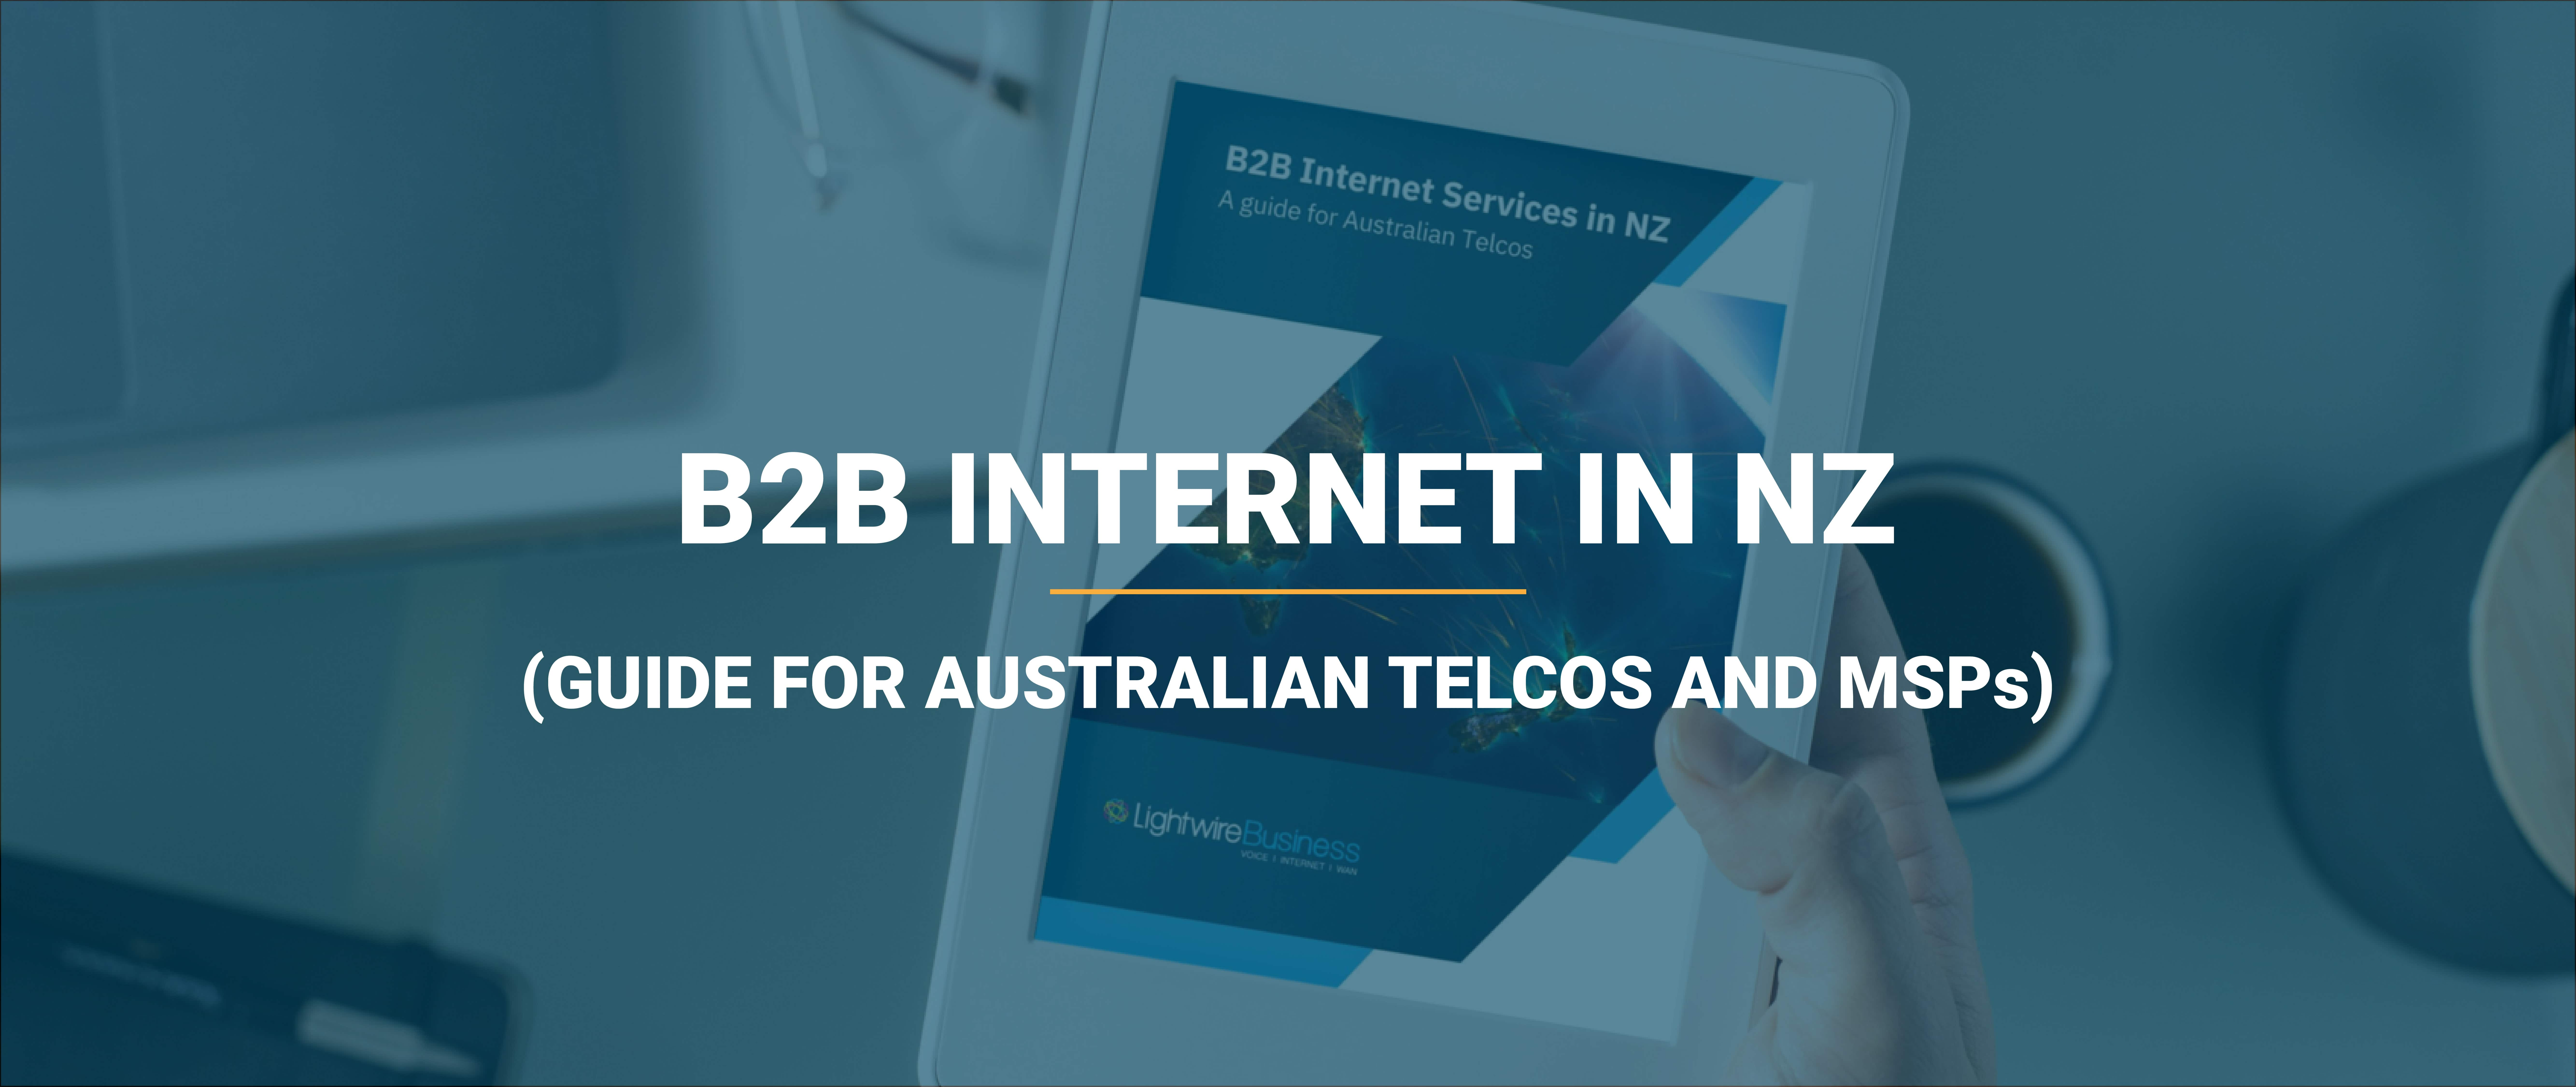 B2B Internet services in NZ - guide for Australian Telco and MSPs